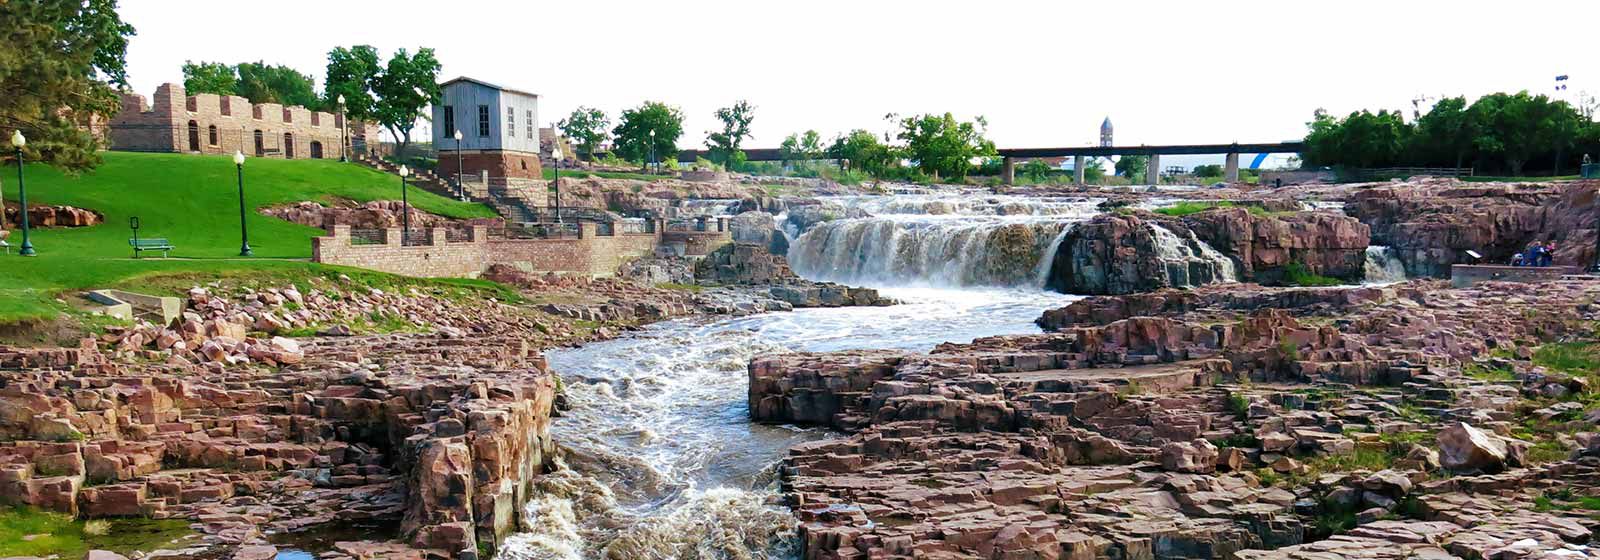 The Sioux Falls, waterfall